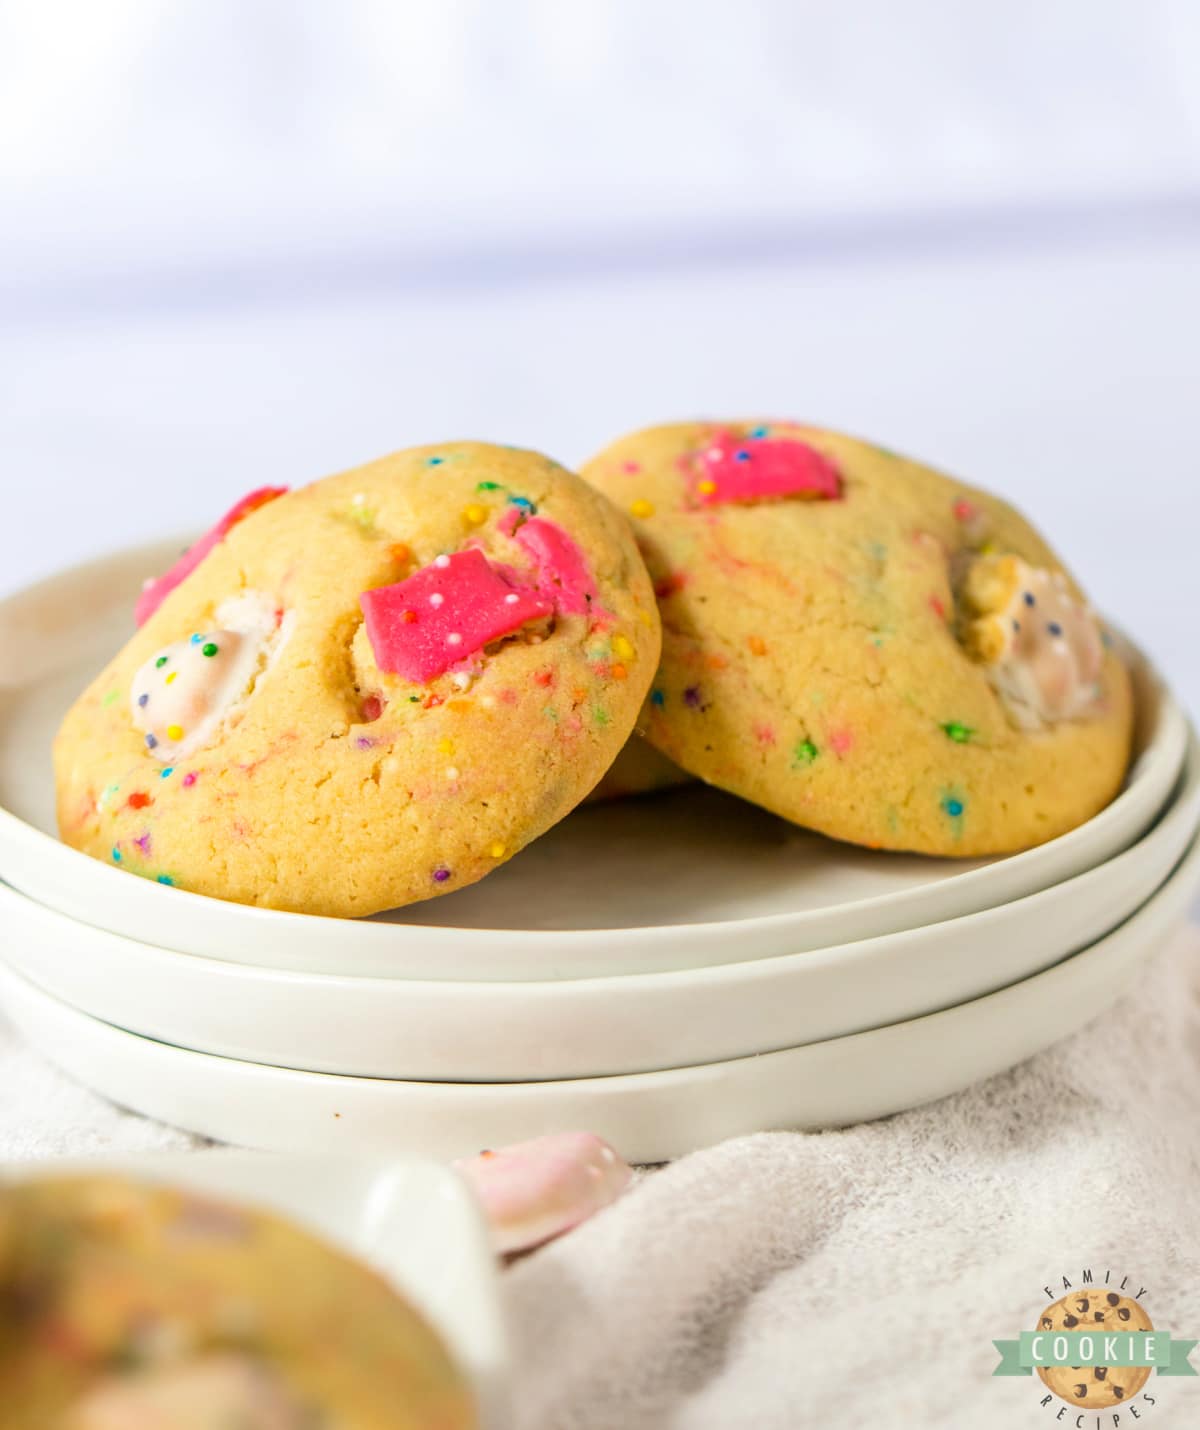 Cookies made with sprinkles and frosted animal cookies